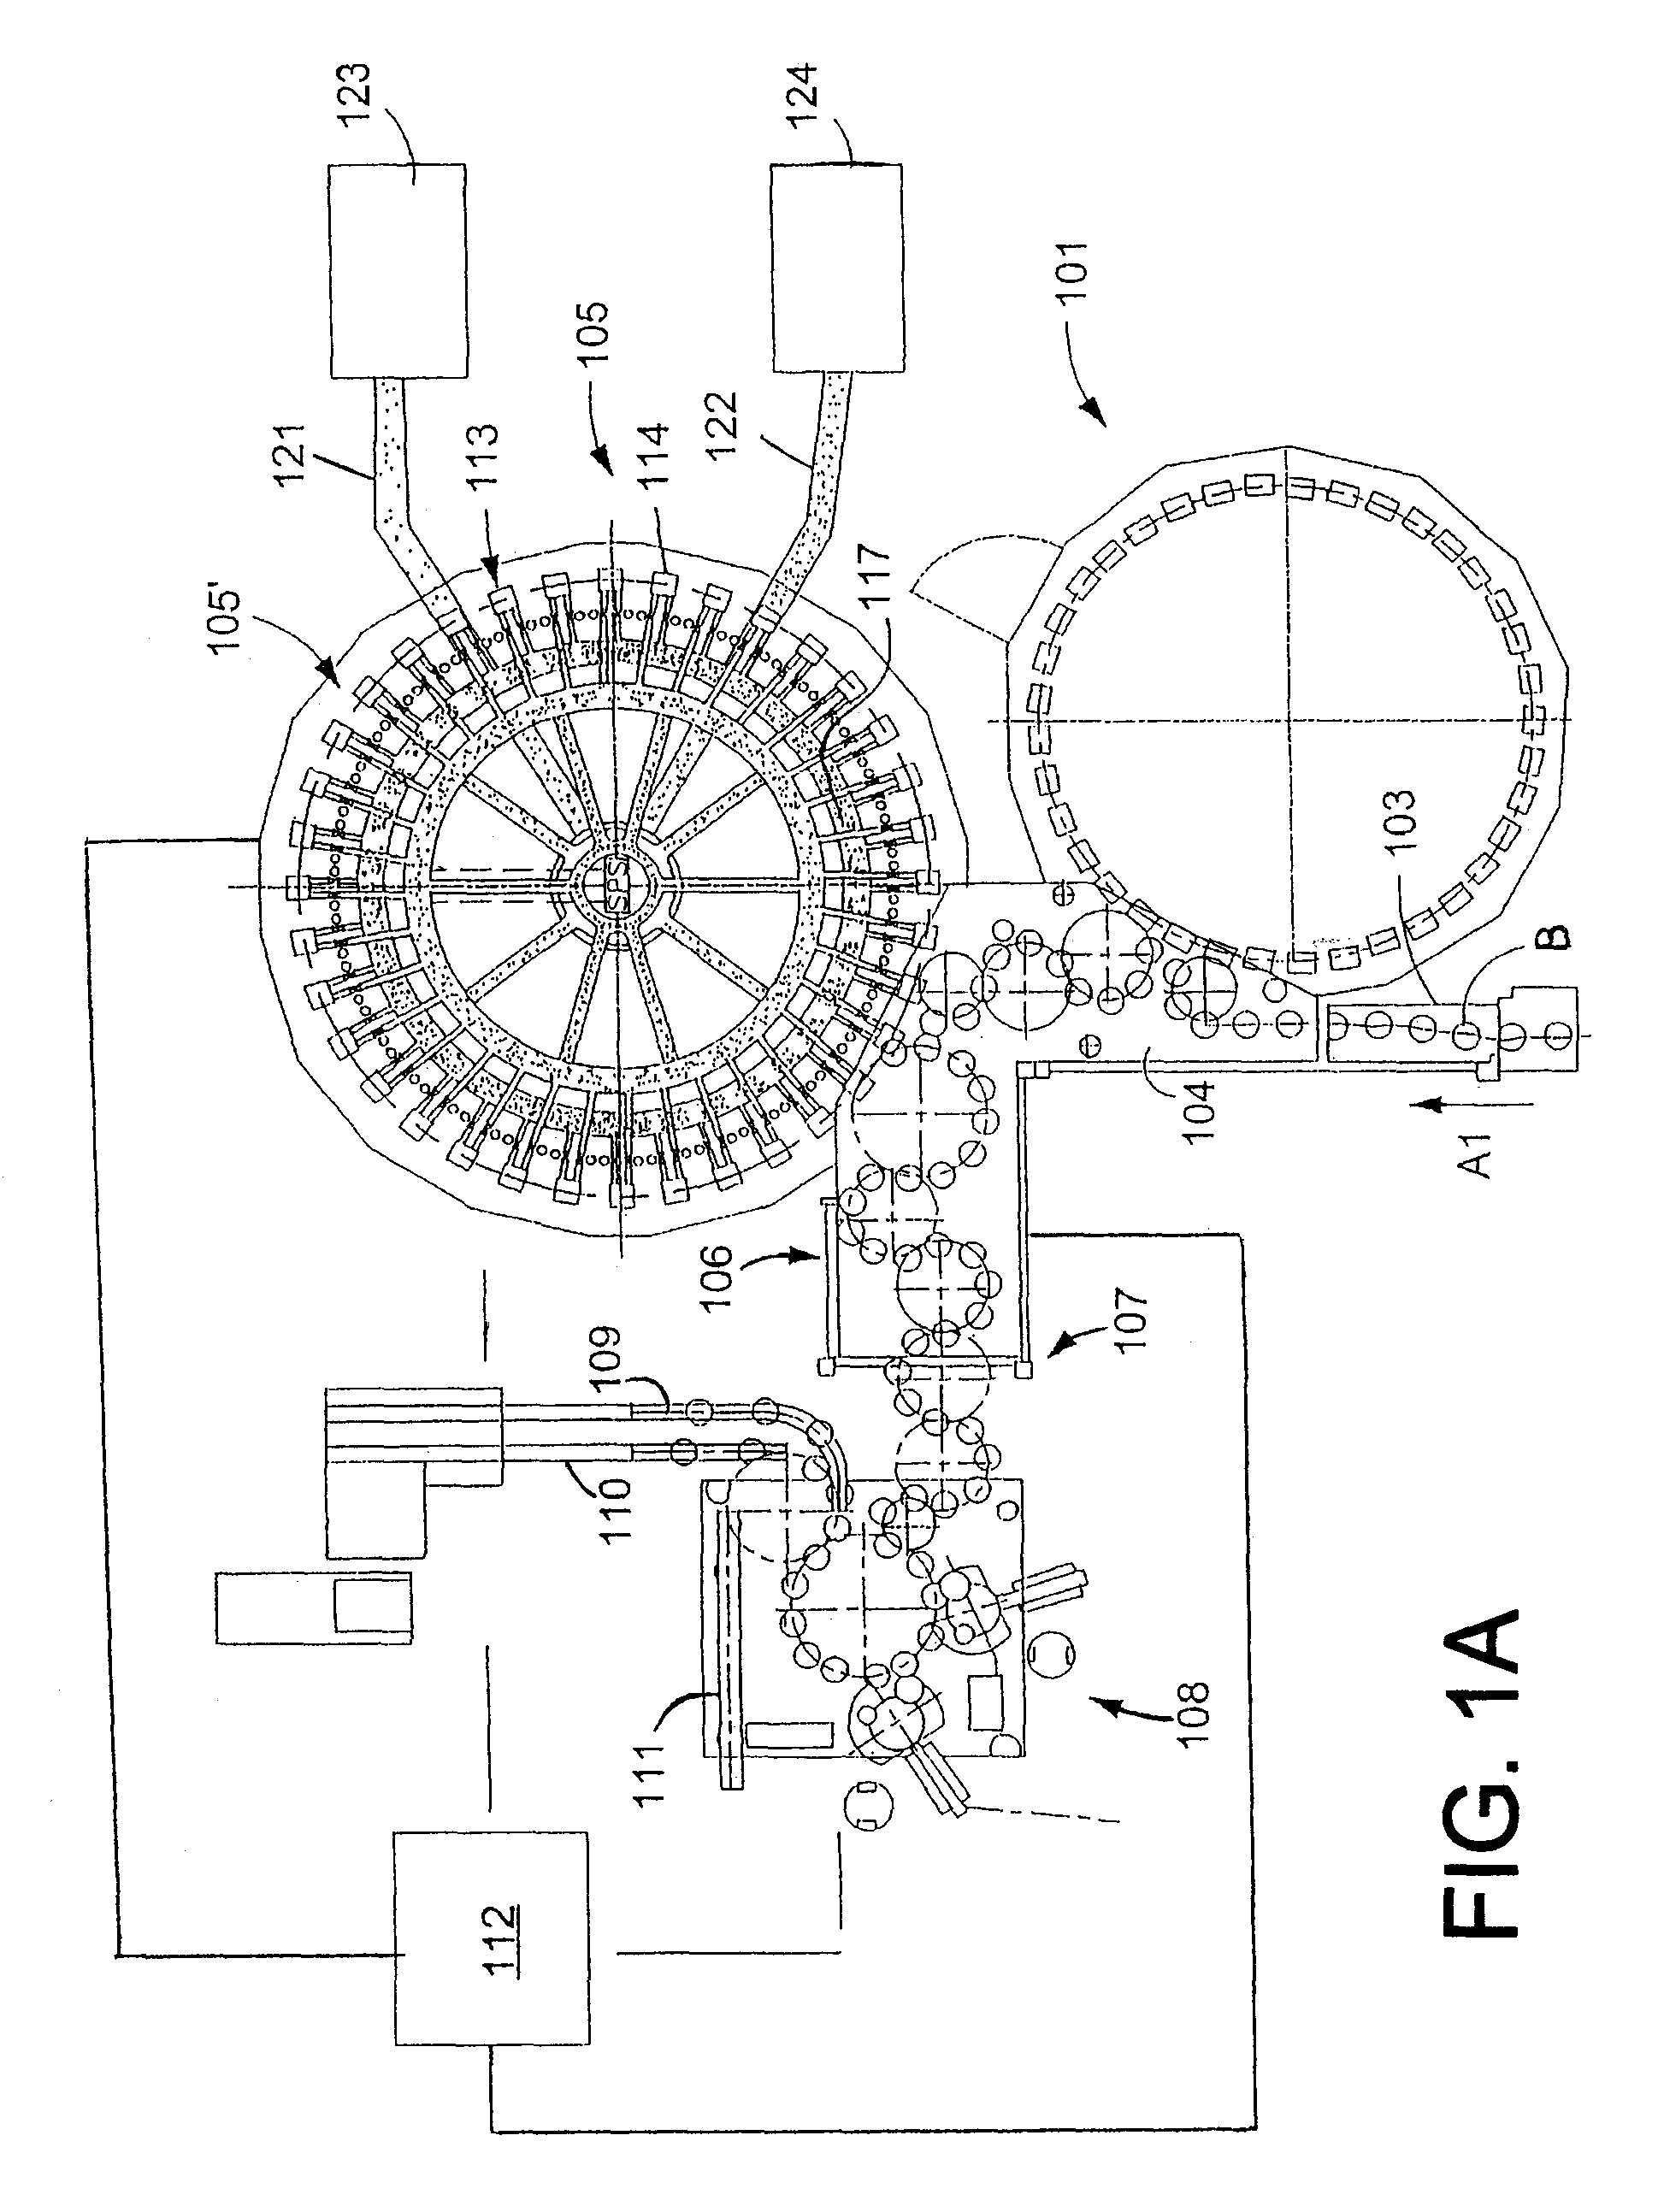 Beverage bottling plant for filling containers, such as bottles and cans, with a liquid beverage, a filling machine for filling containers with a liquid, and a method for filling containers with the filling machine